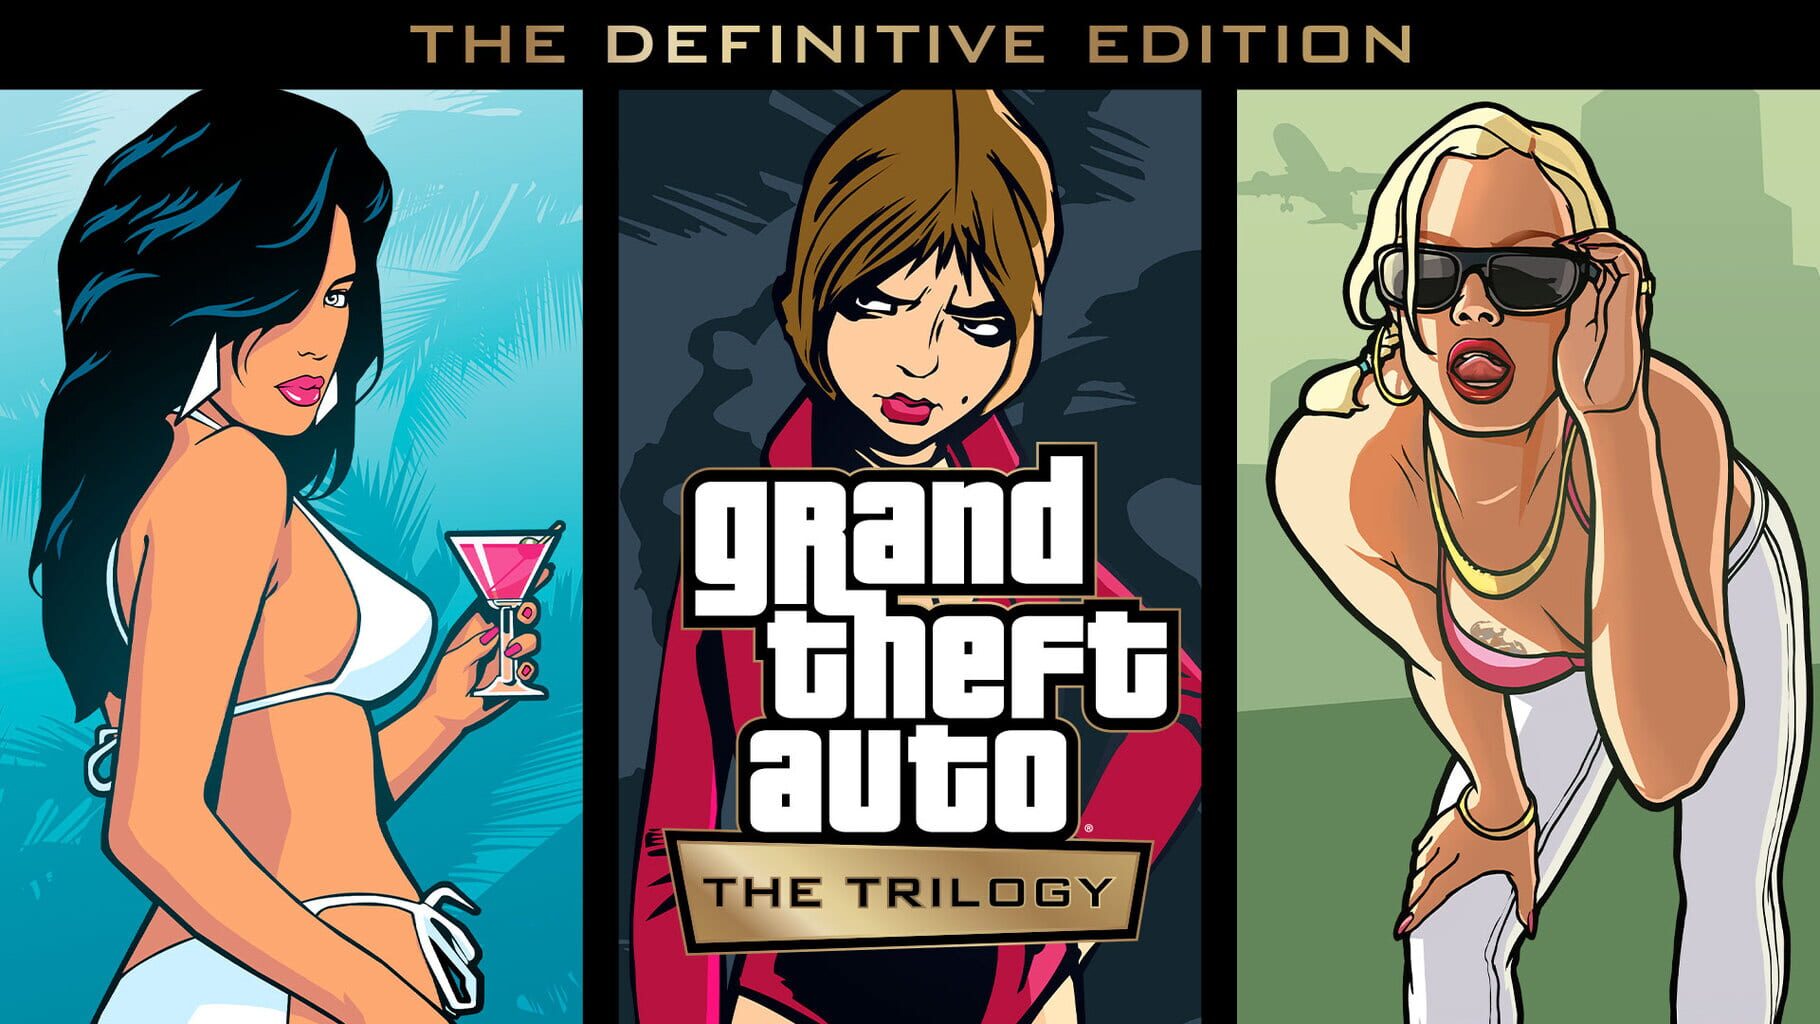 Grand Theft Auto: The Trilogy - The Definitive Edition artwork